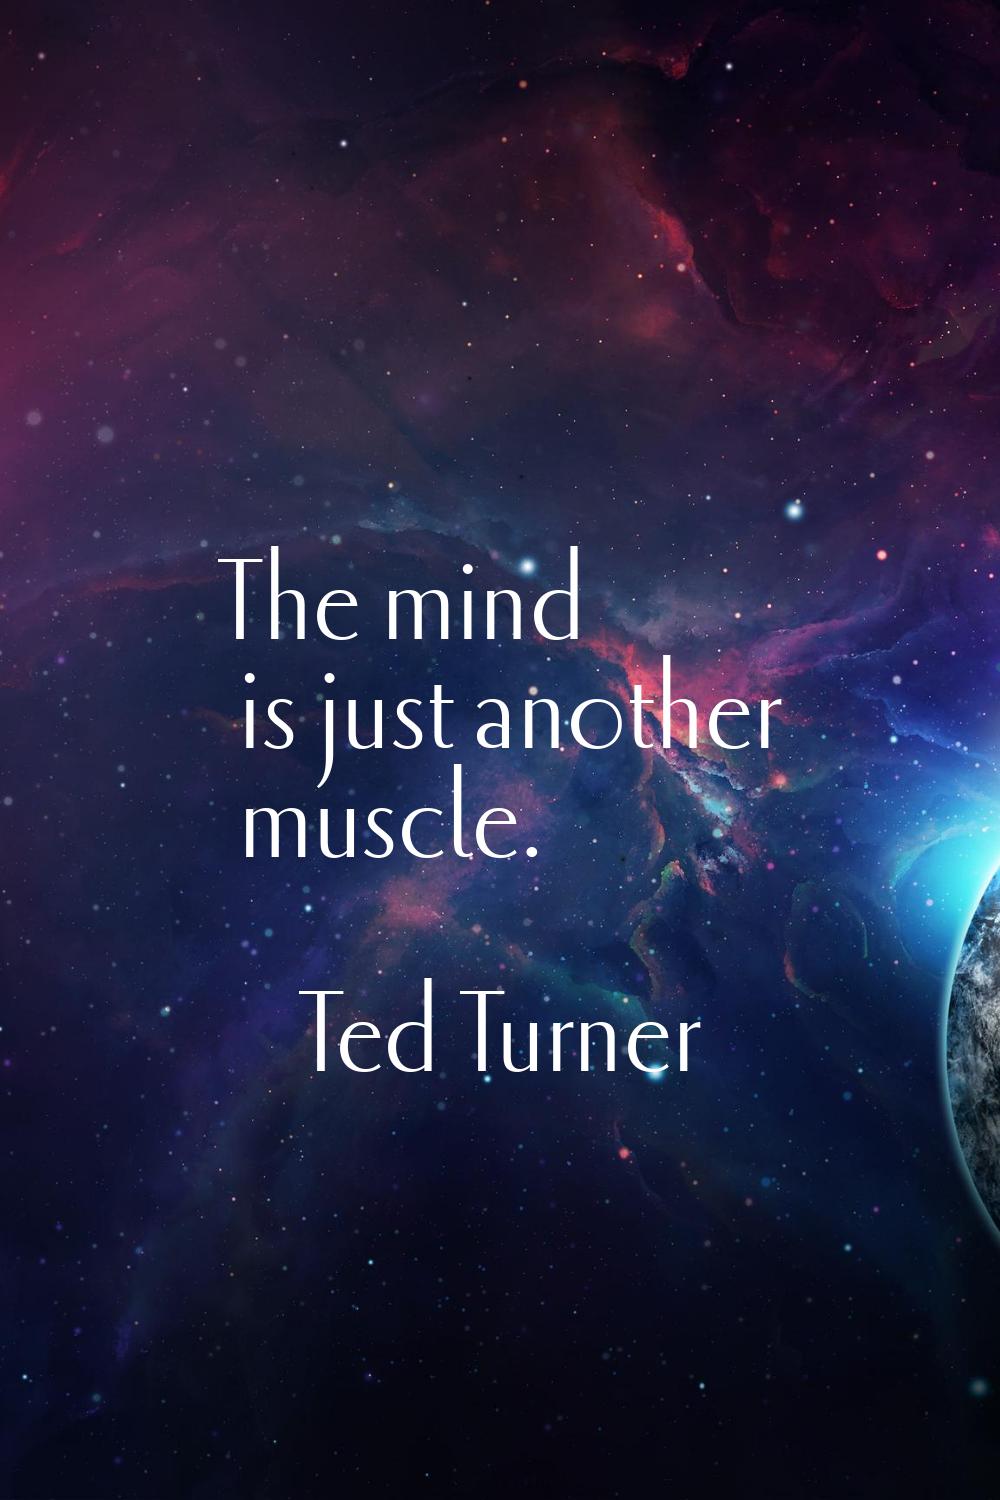 The mind is just another muscle.